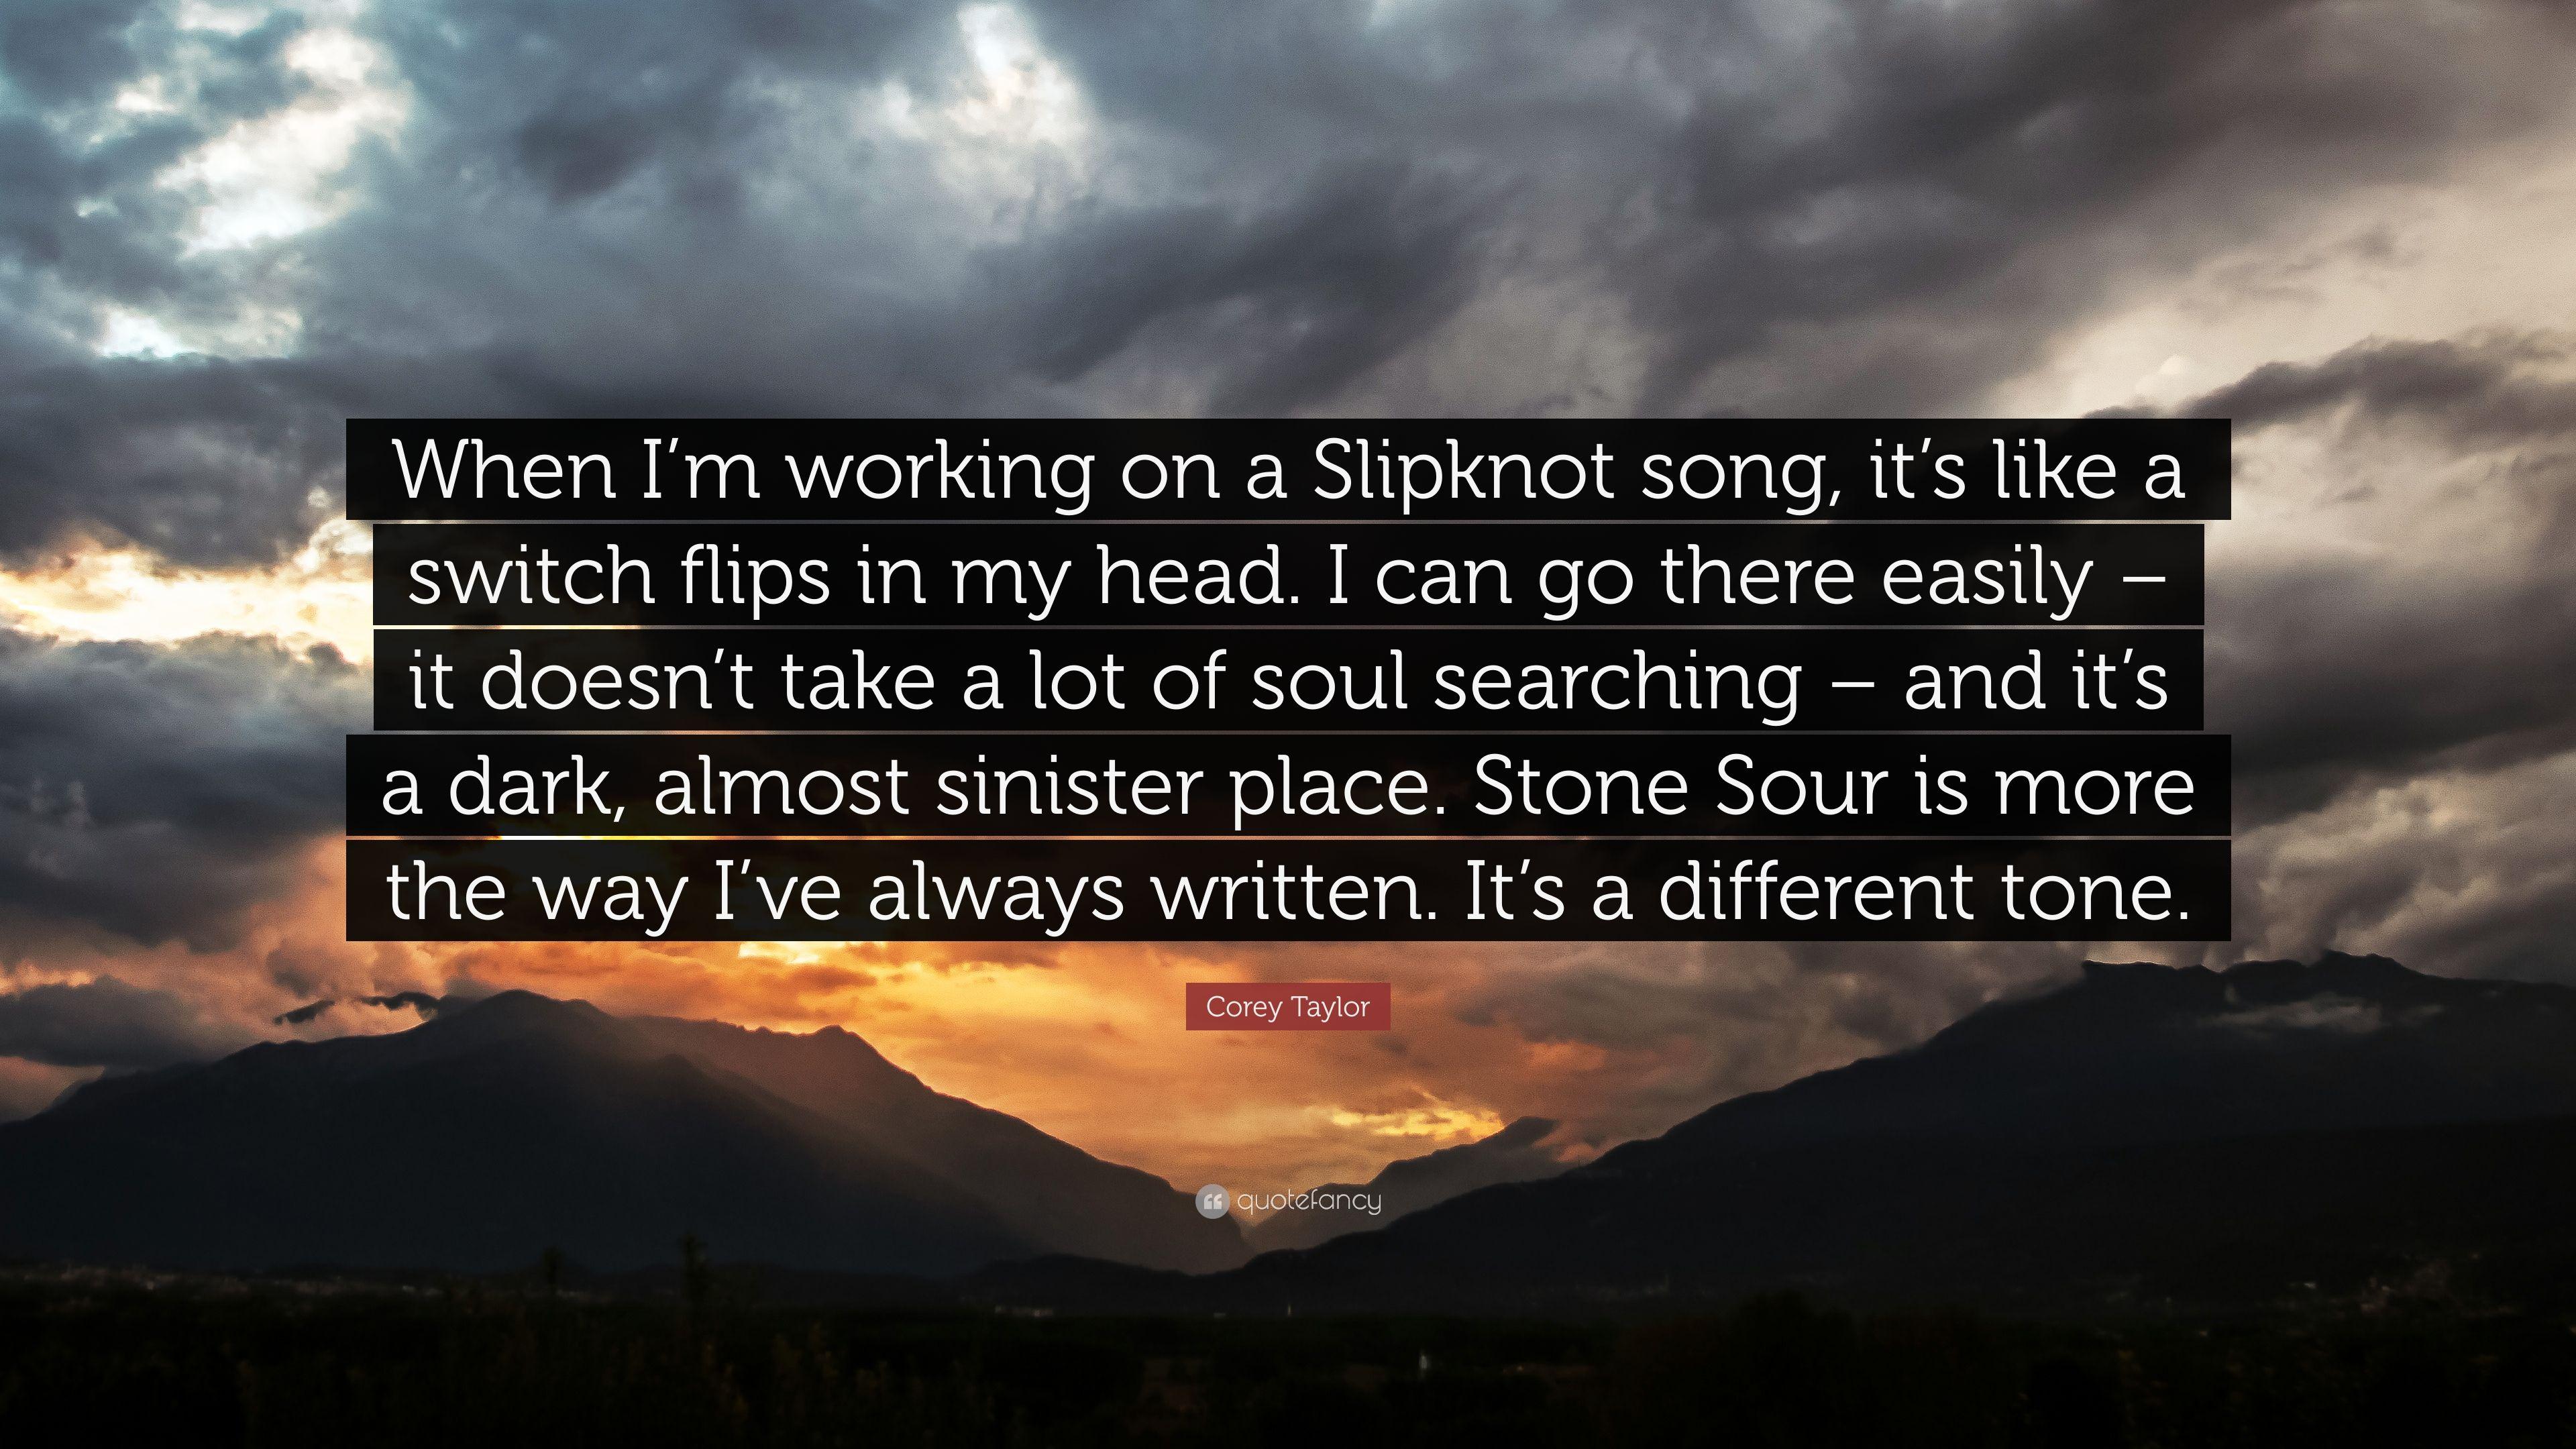 Corey Taylor Quote: “When I'm working on a Slipknot song, it's like